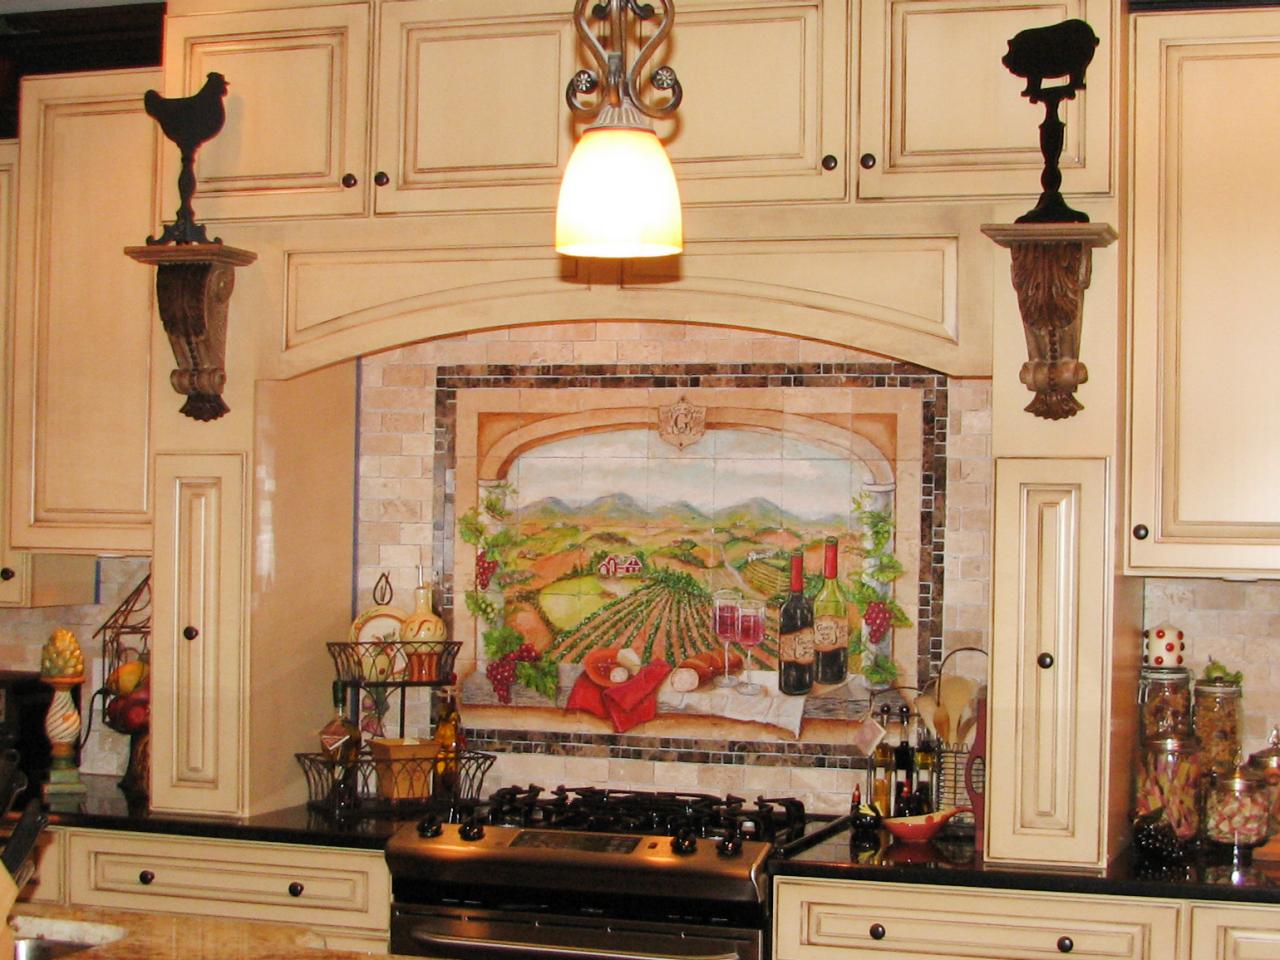 Ceramic panel over the gas stove of the kitchen